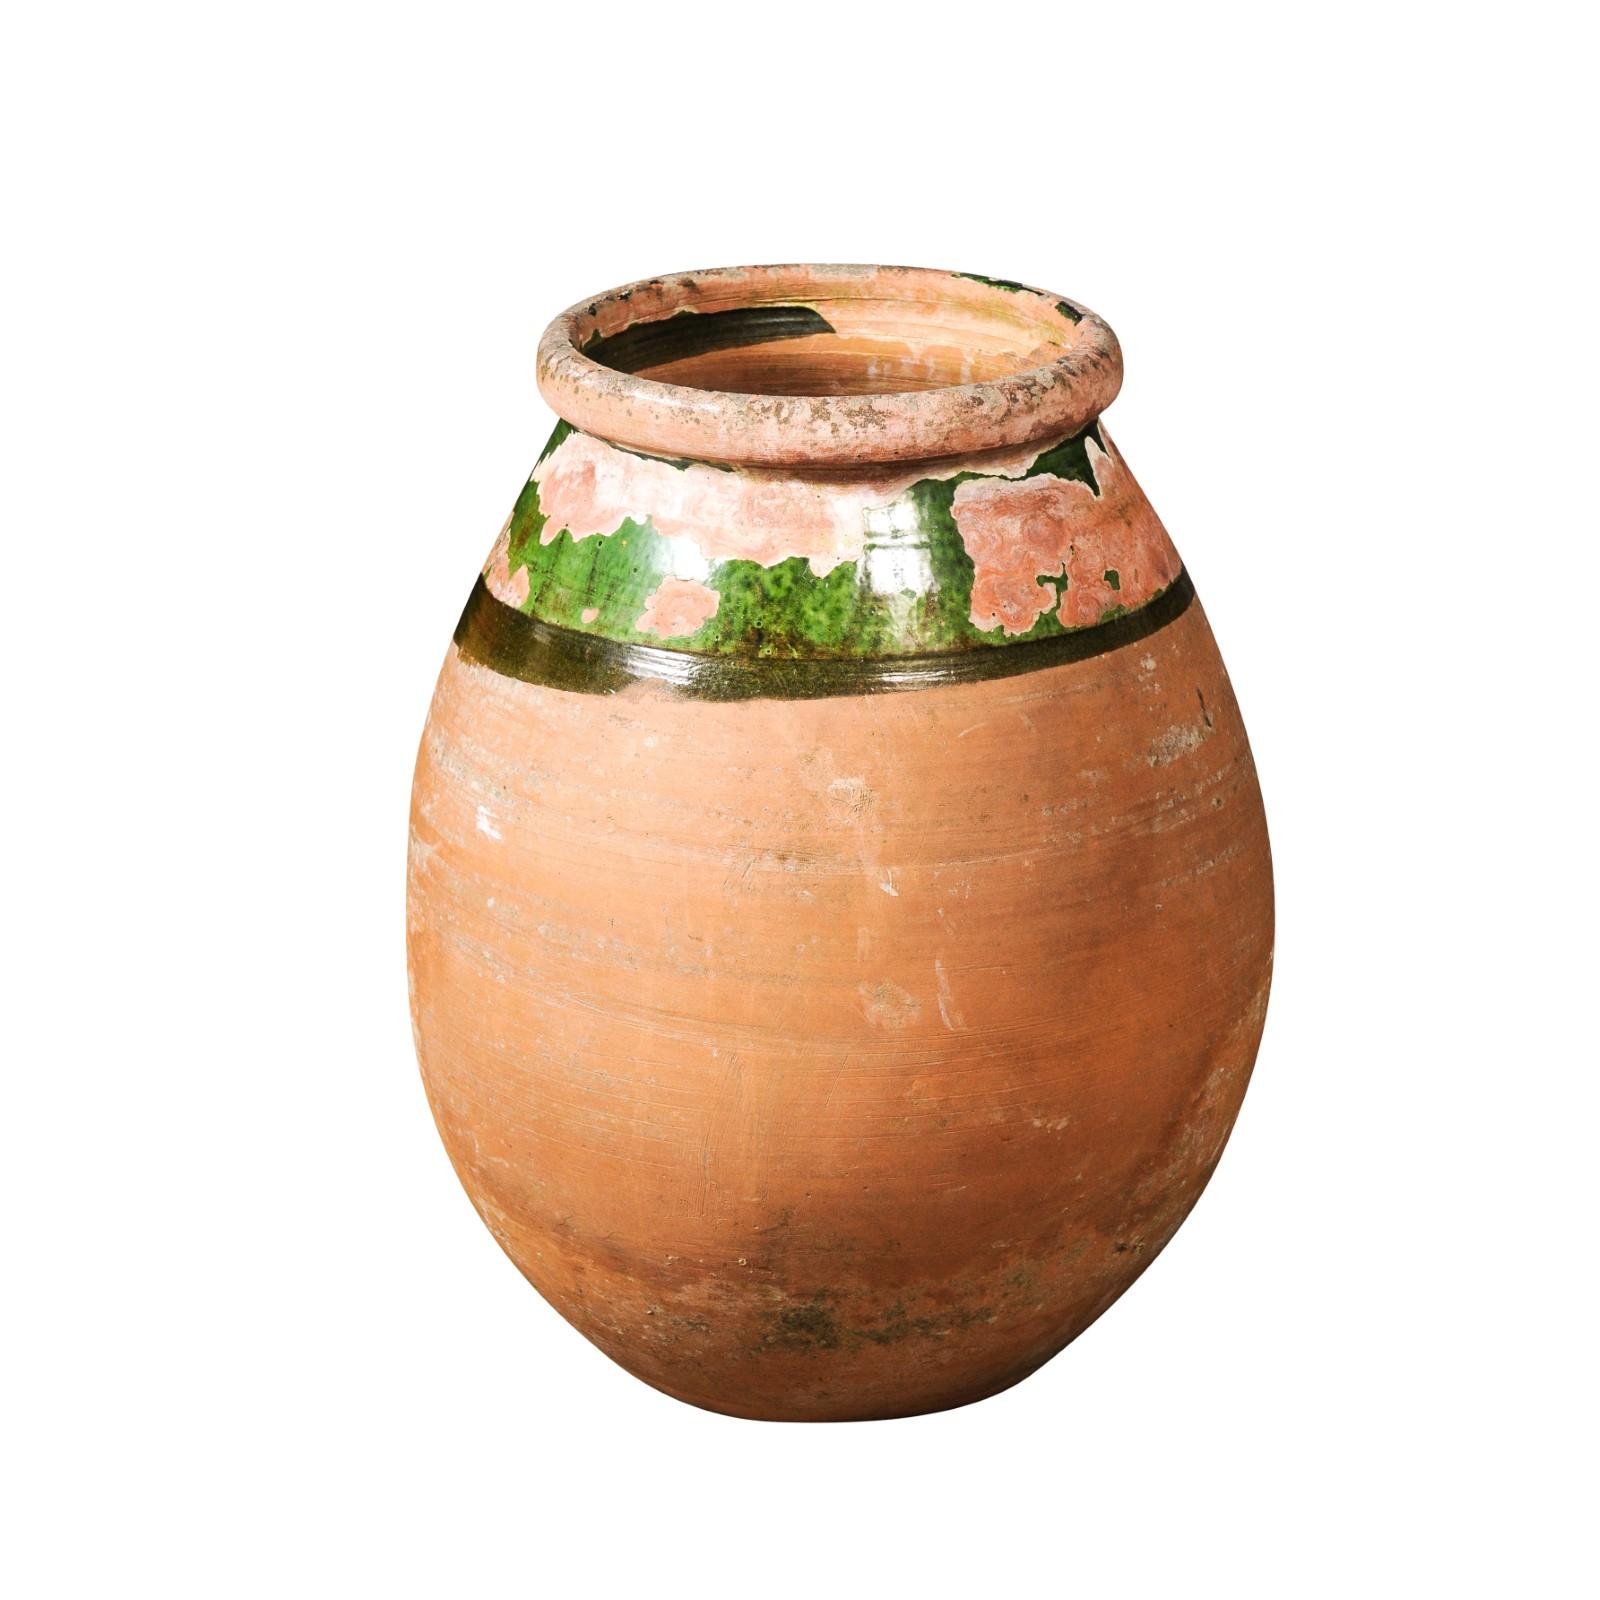 A French Provincial Biot jar from the 20th century with green glaze, generous lines and great weathered patina. Infuse your interior with the bucolic charm of the French Povençale region through this captivating French 20th century glazed Biot jar.